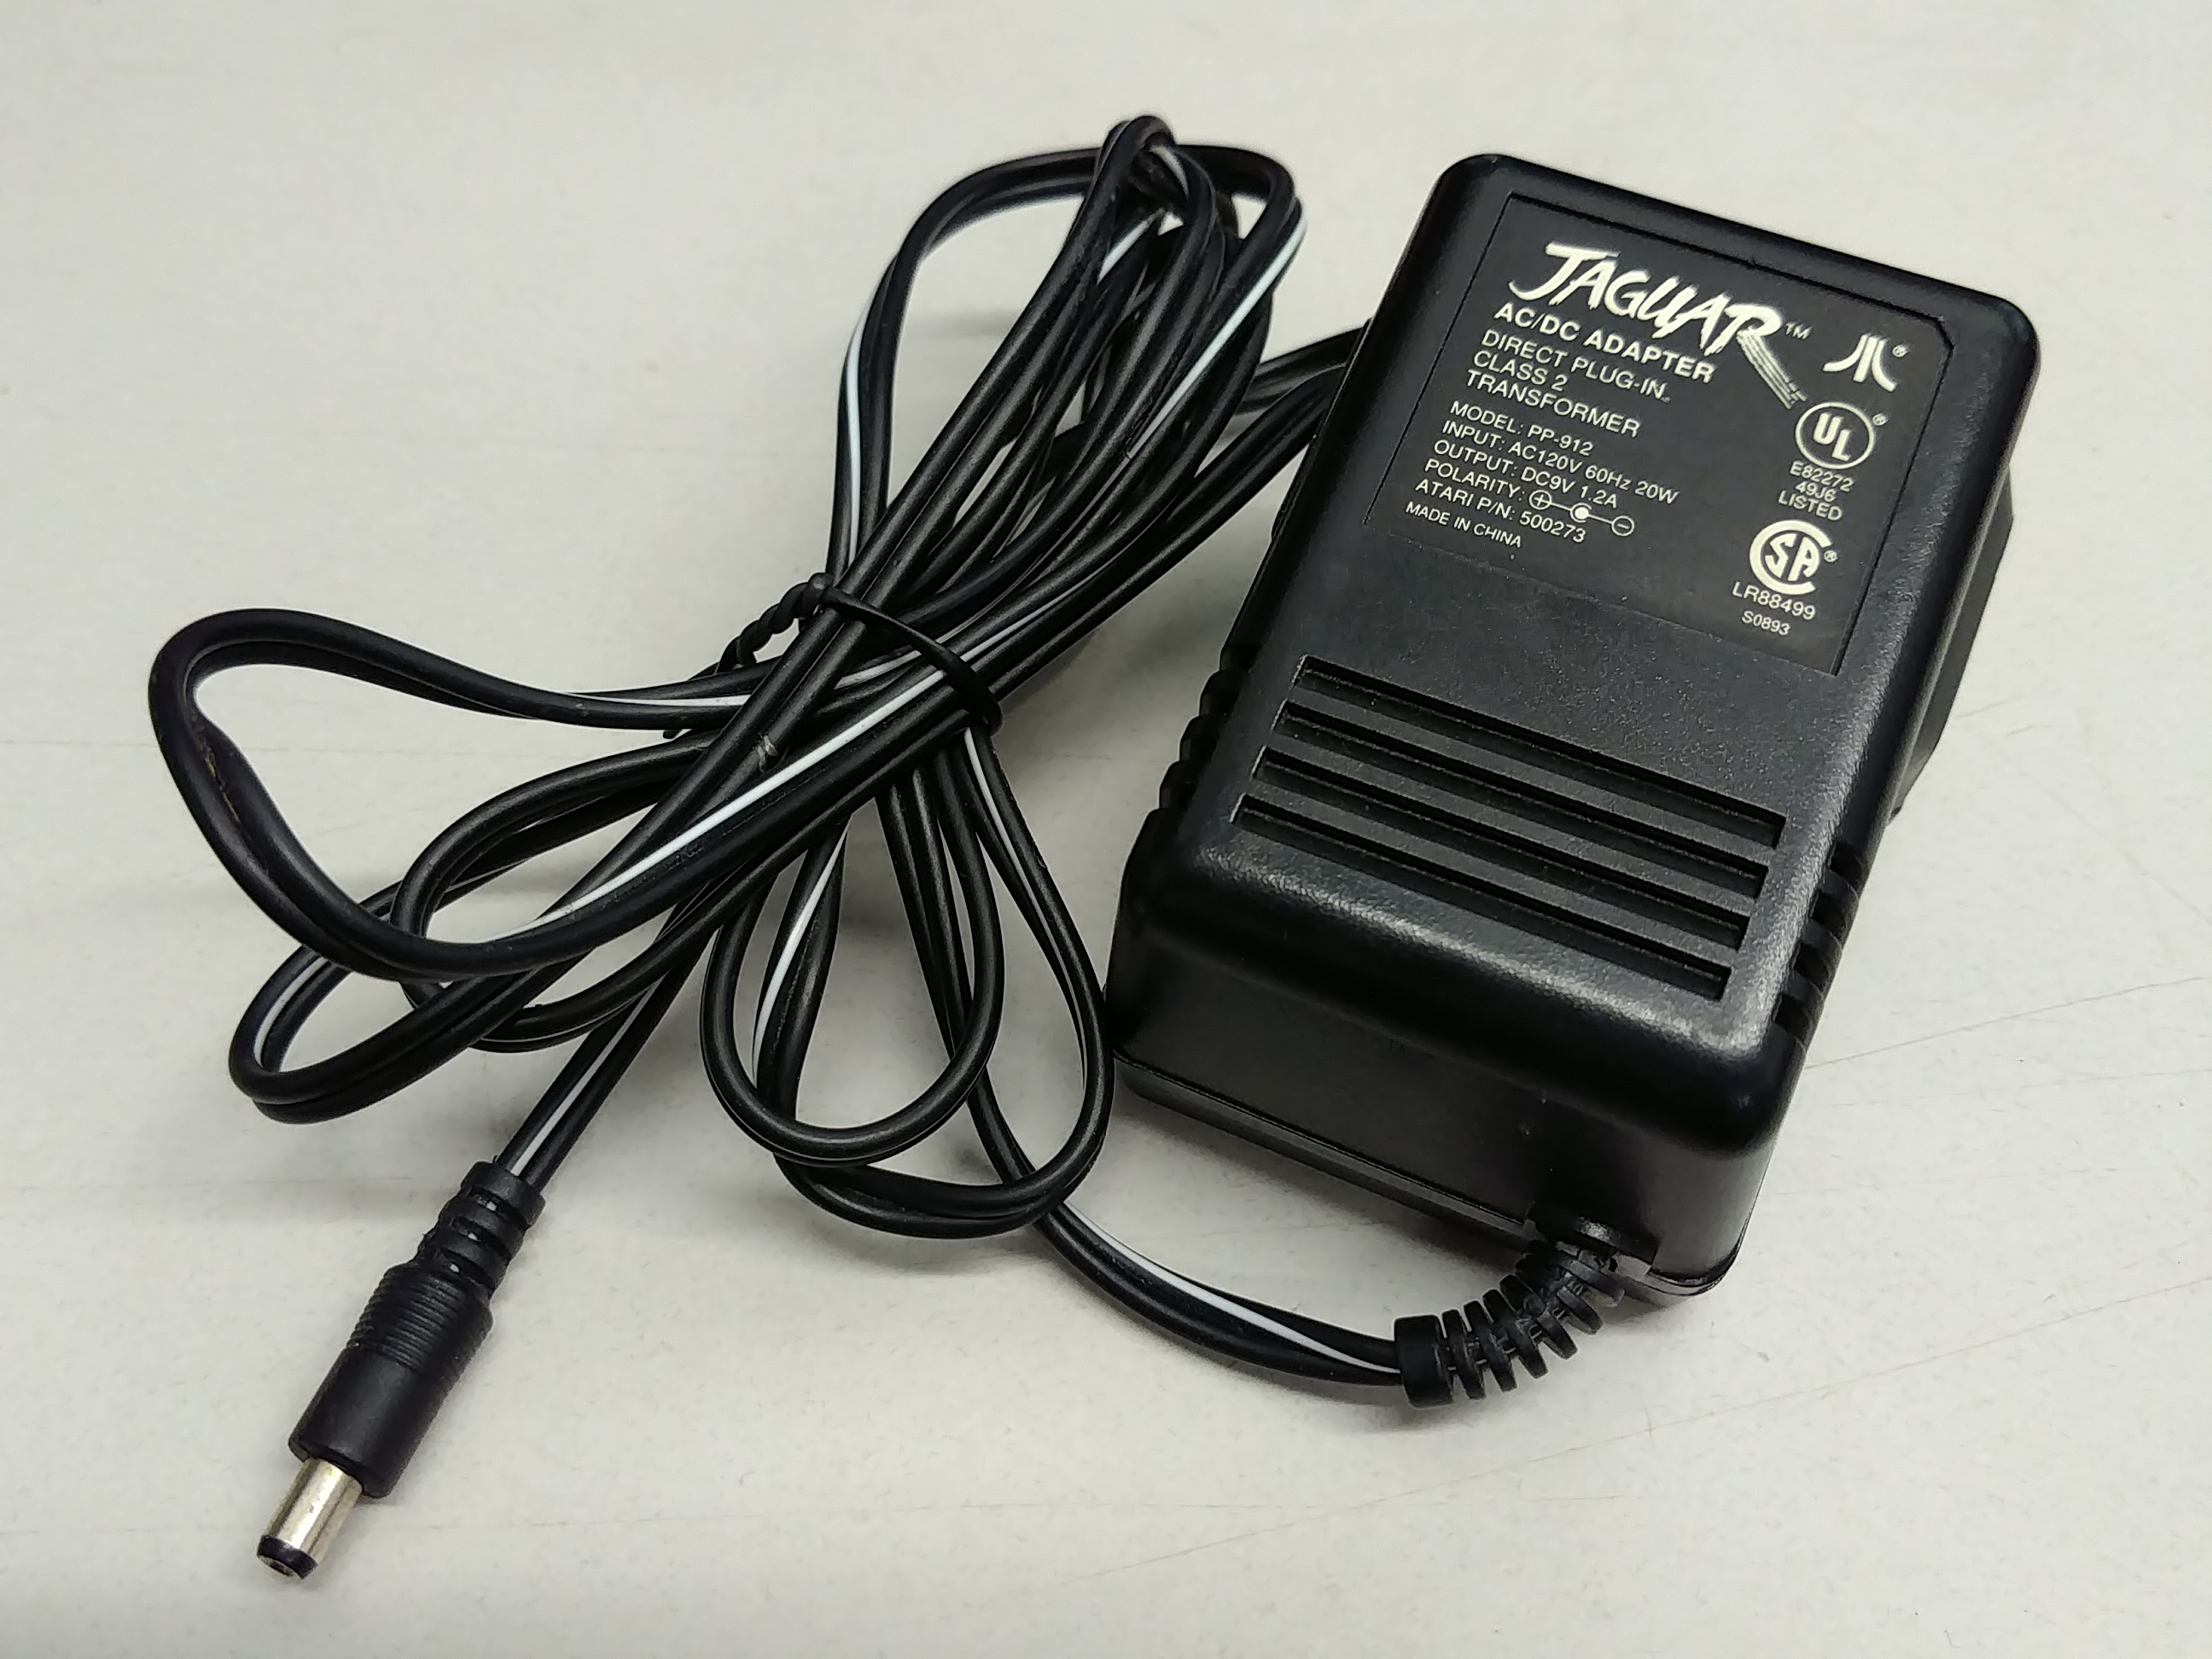 JAG: AC DC POWER ADAPTER - MODEL PP-912 (USED)